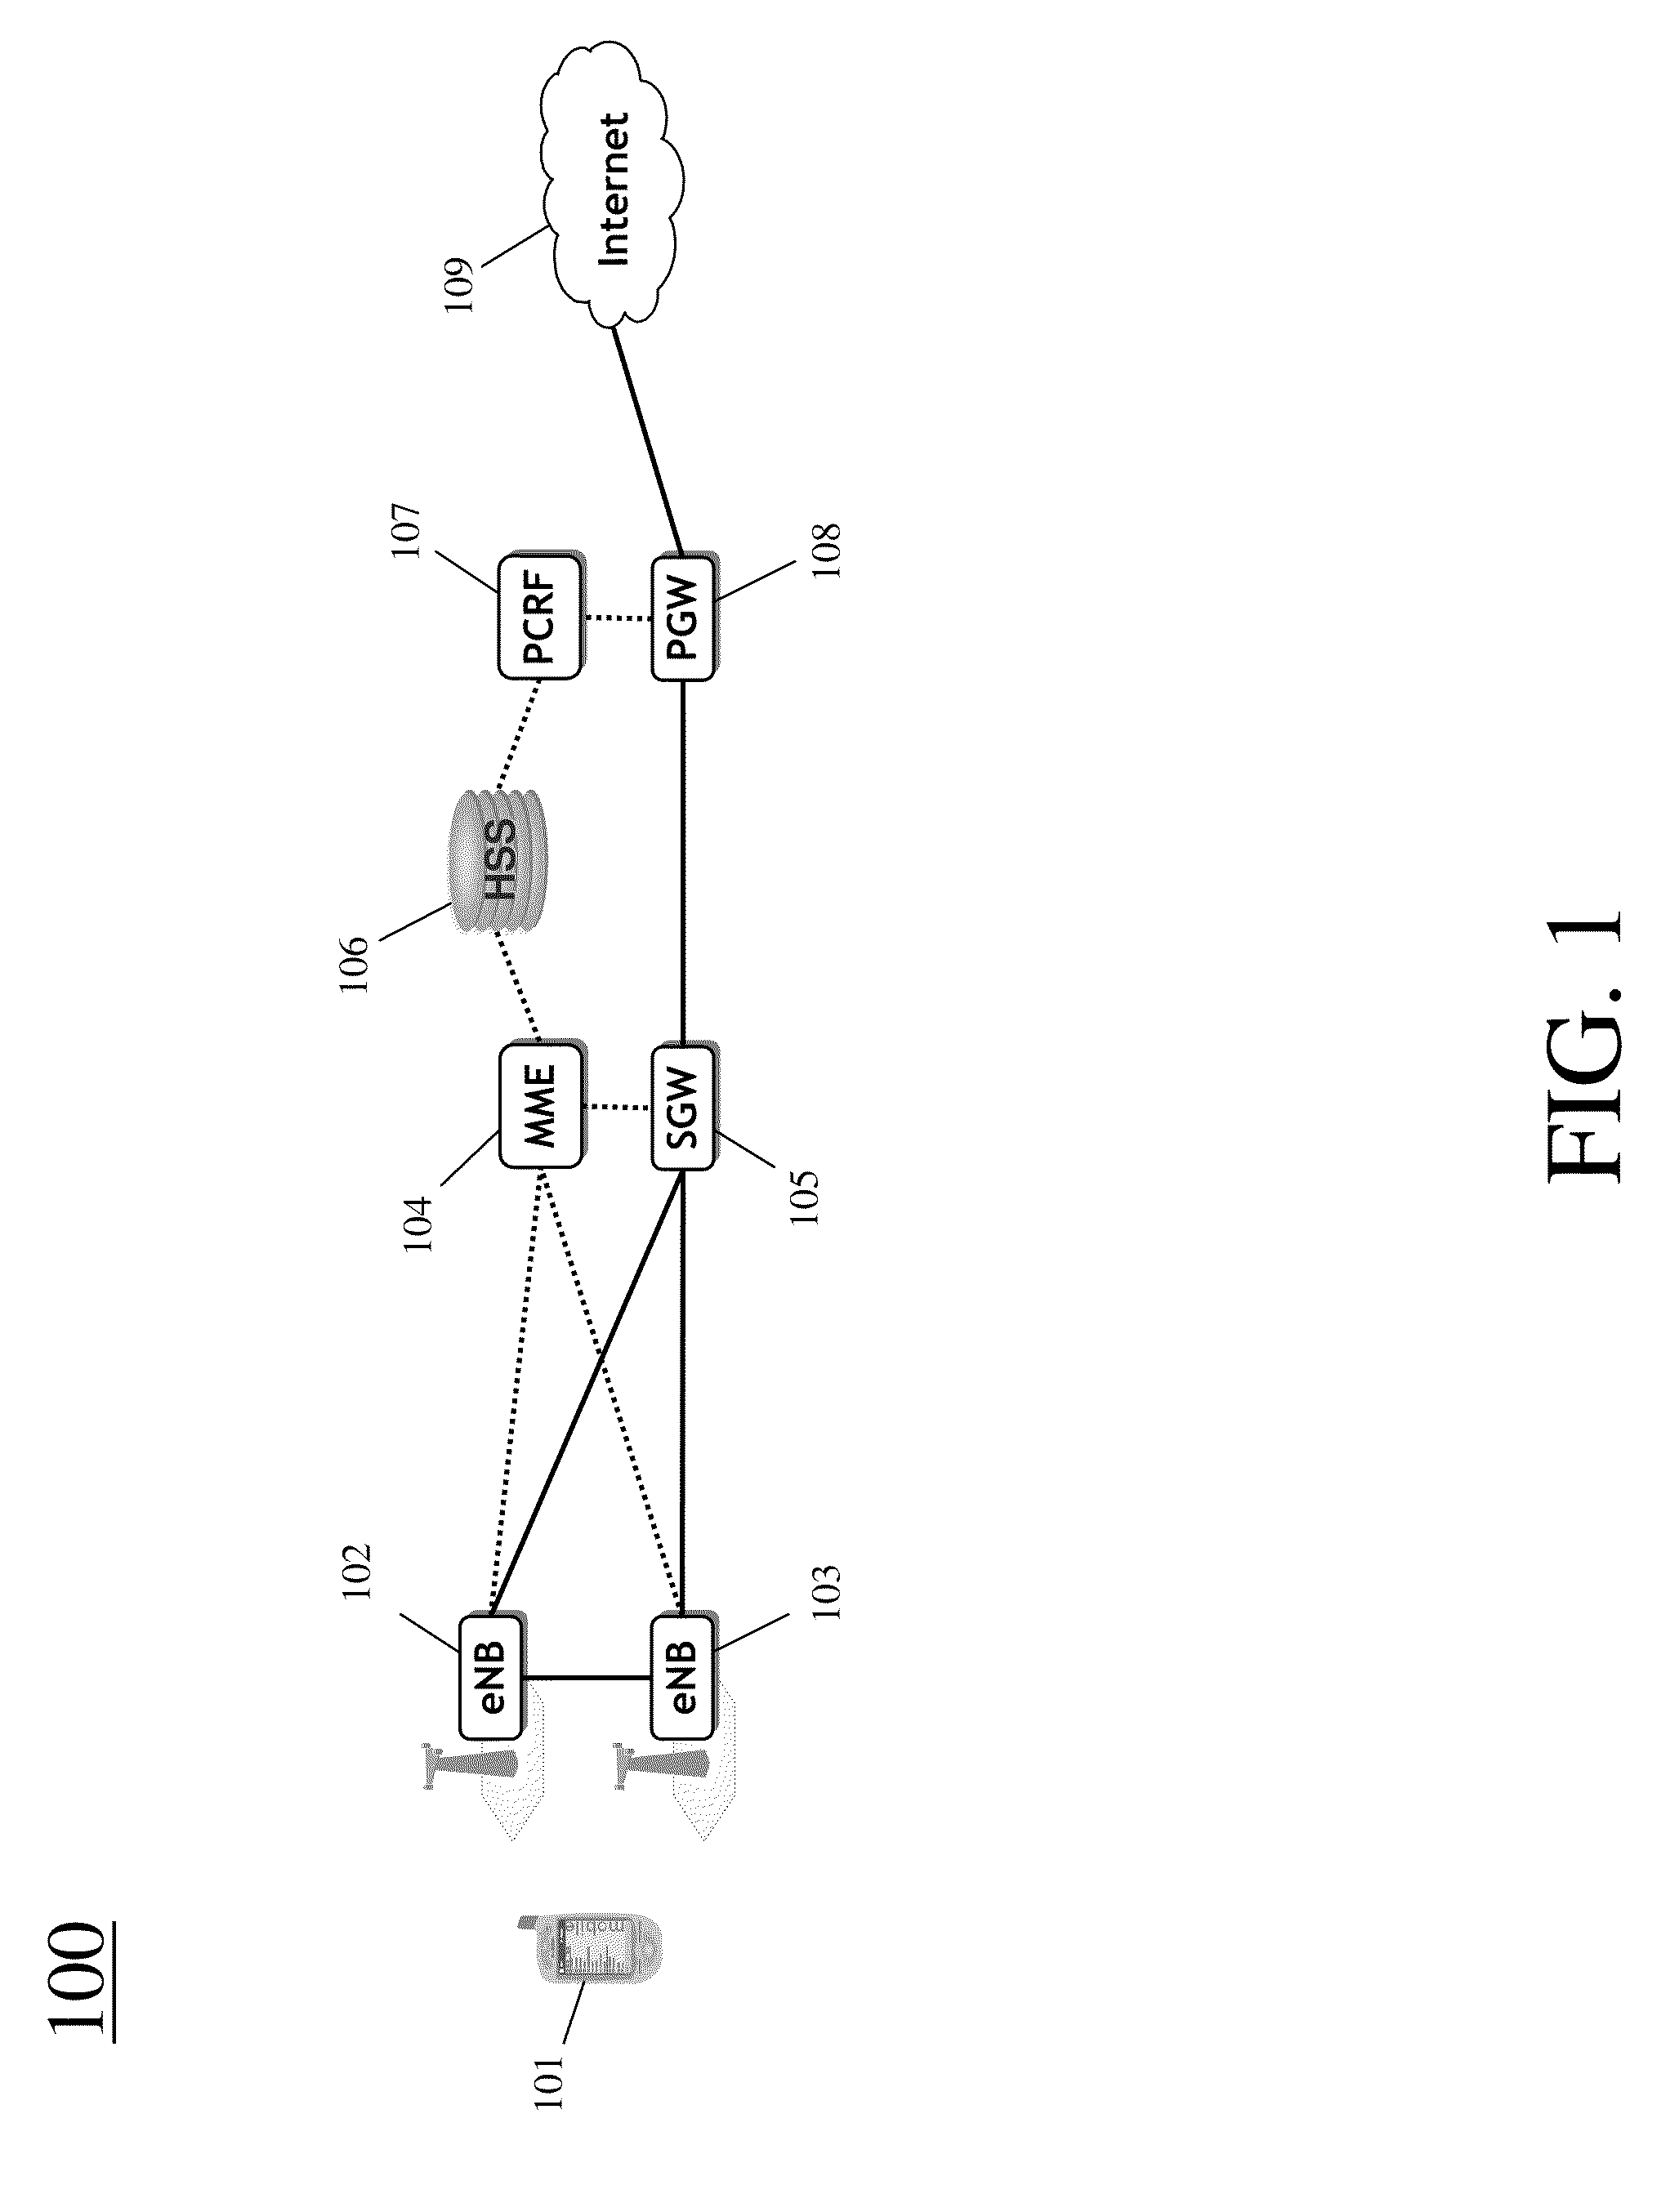 Policy And Charging Rules Function In An Extended Self Optimizing Network